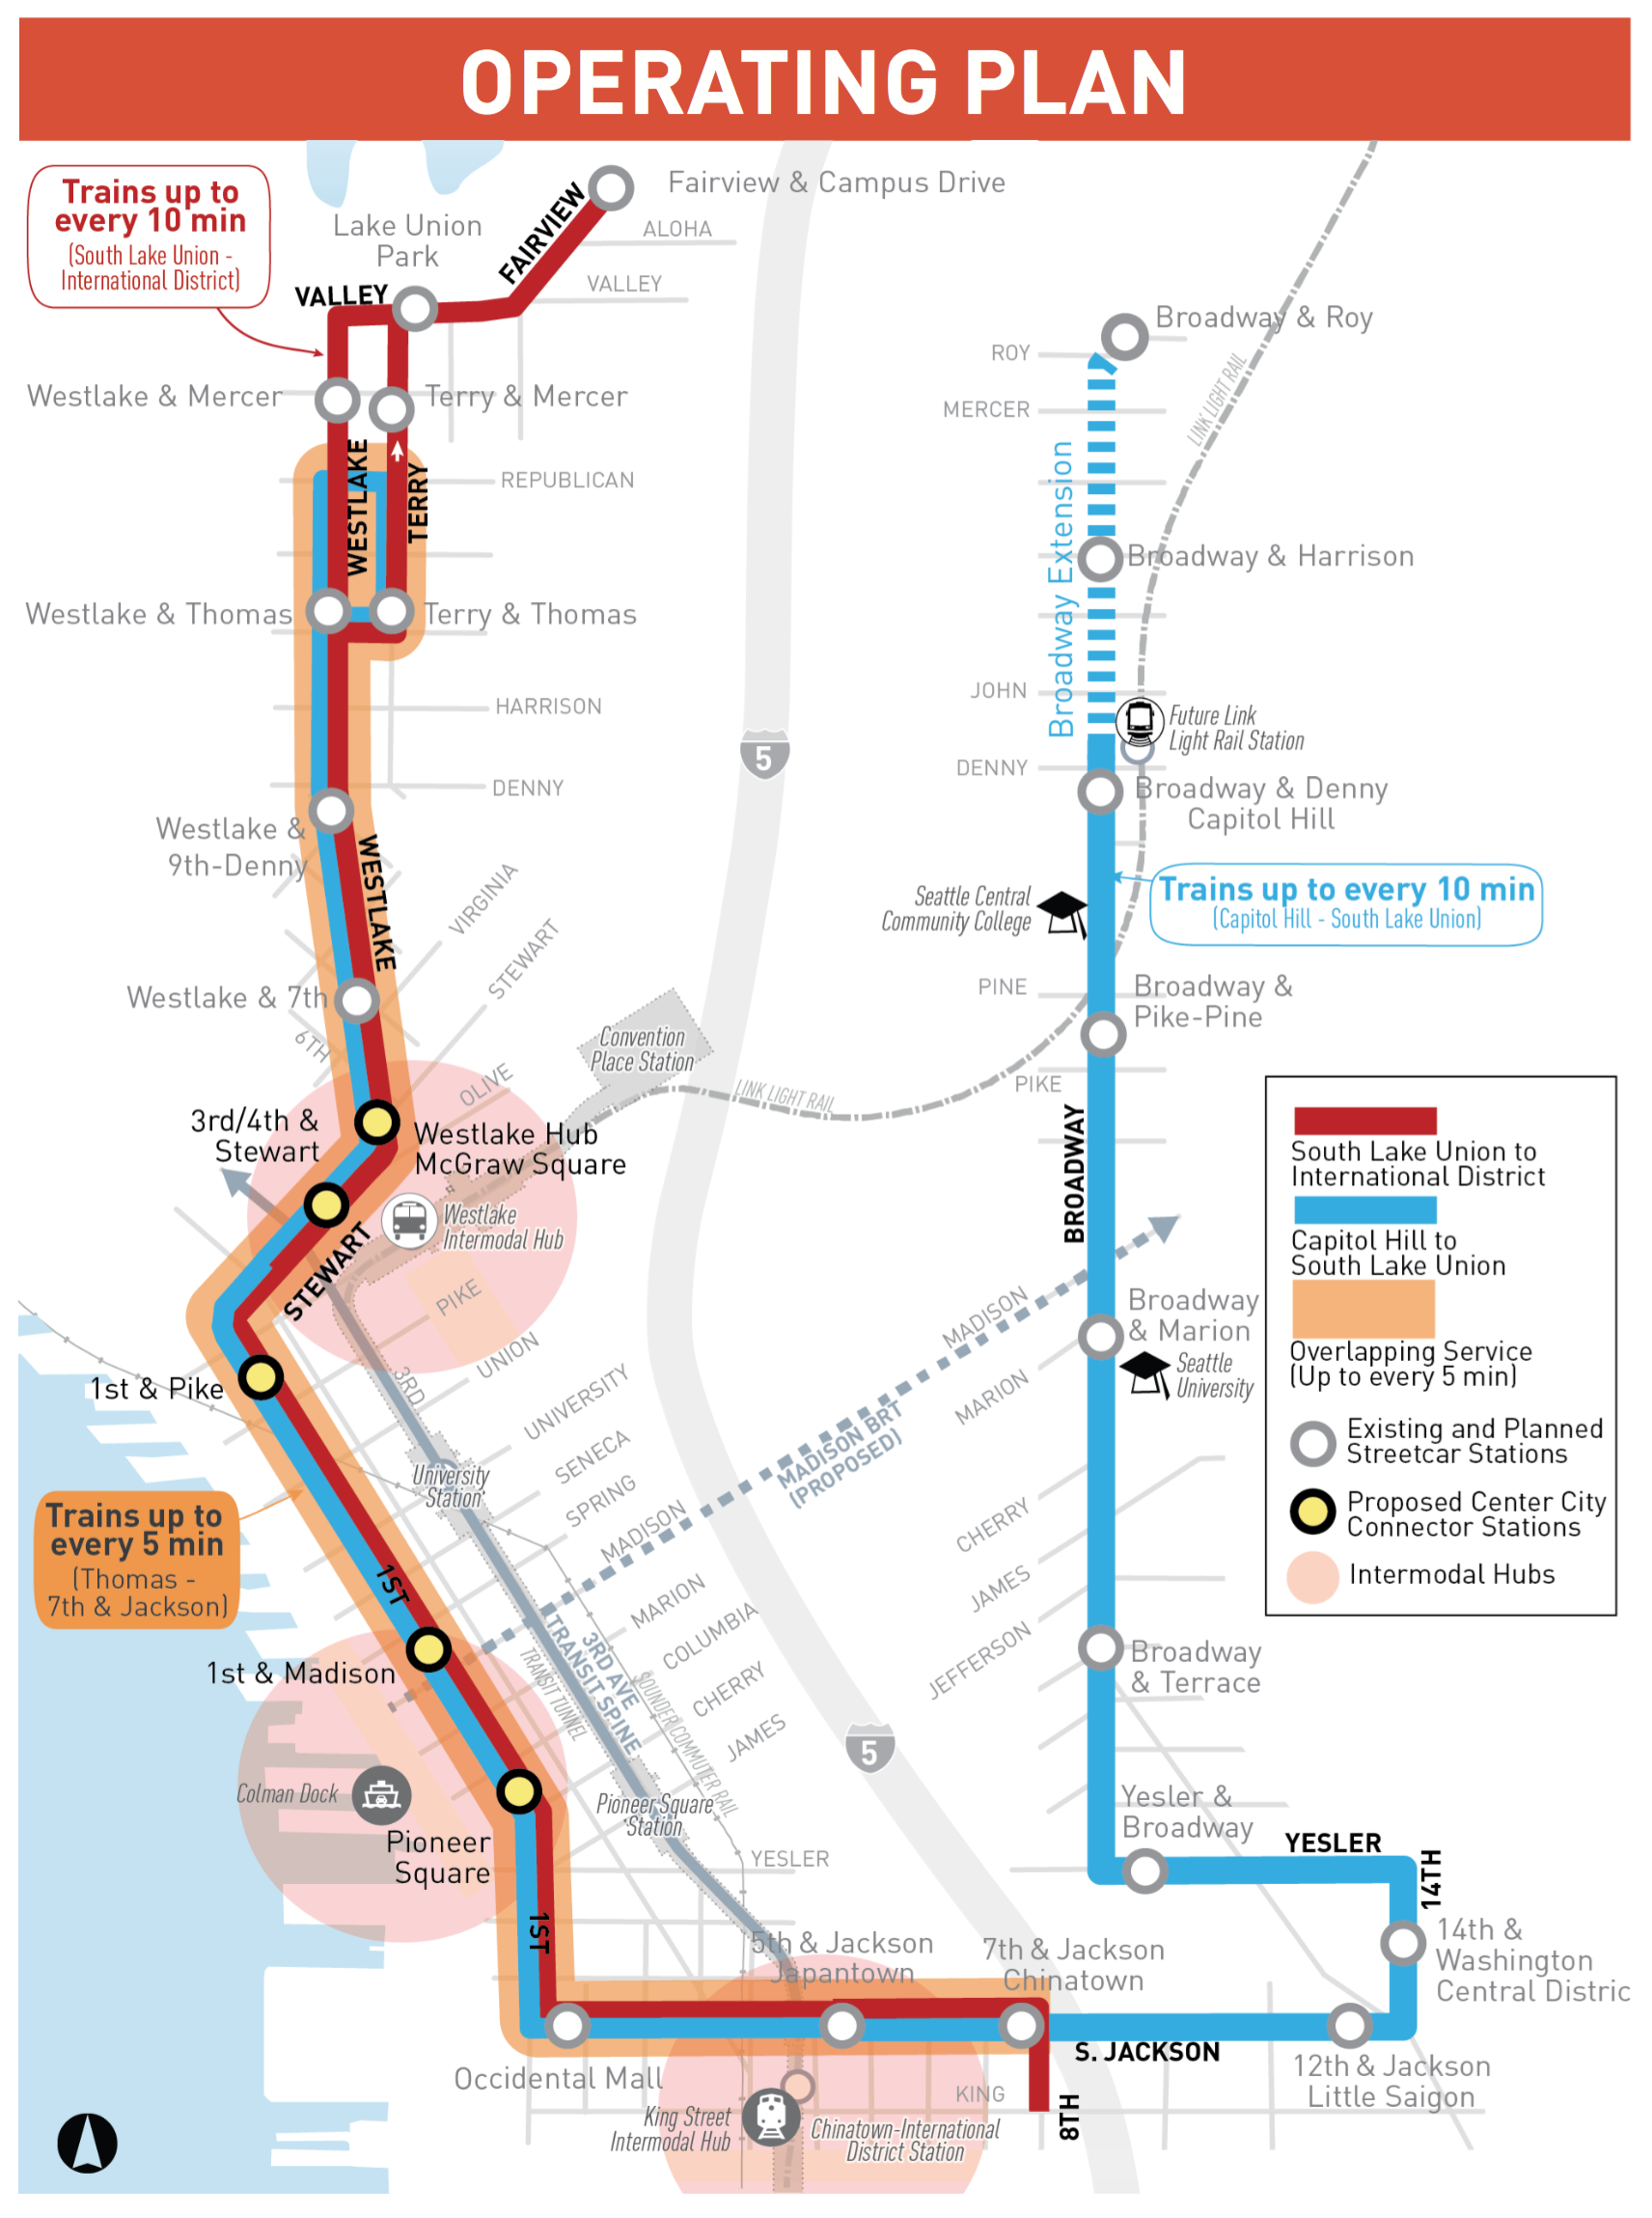 How SDOT plans to operate the streetcar system once the Center City Connector opens. (City of Seattle)